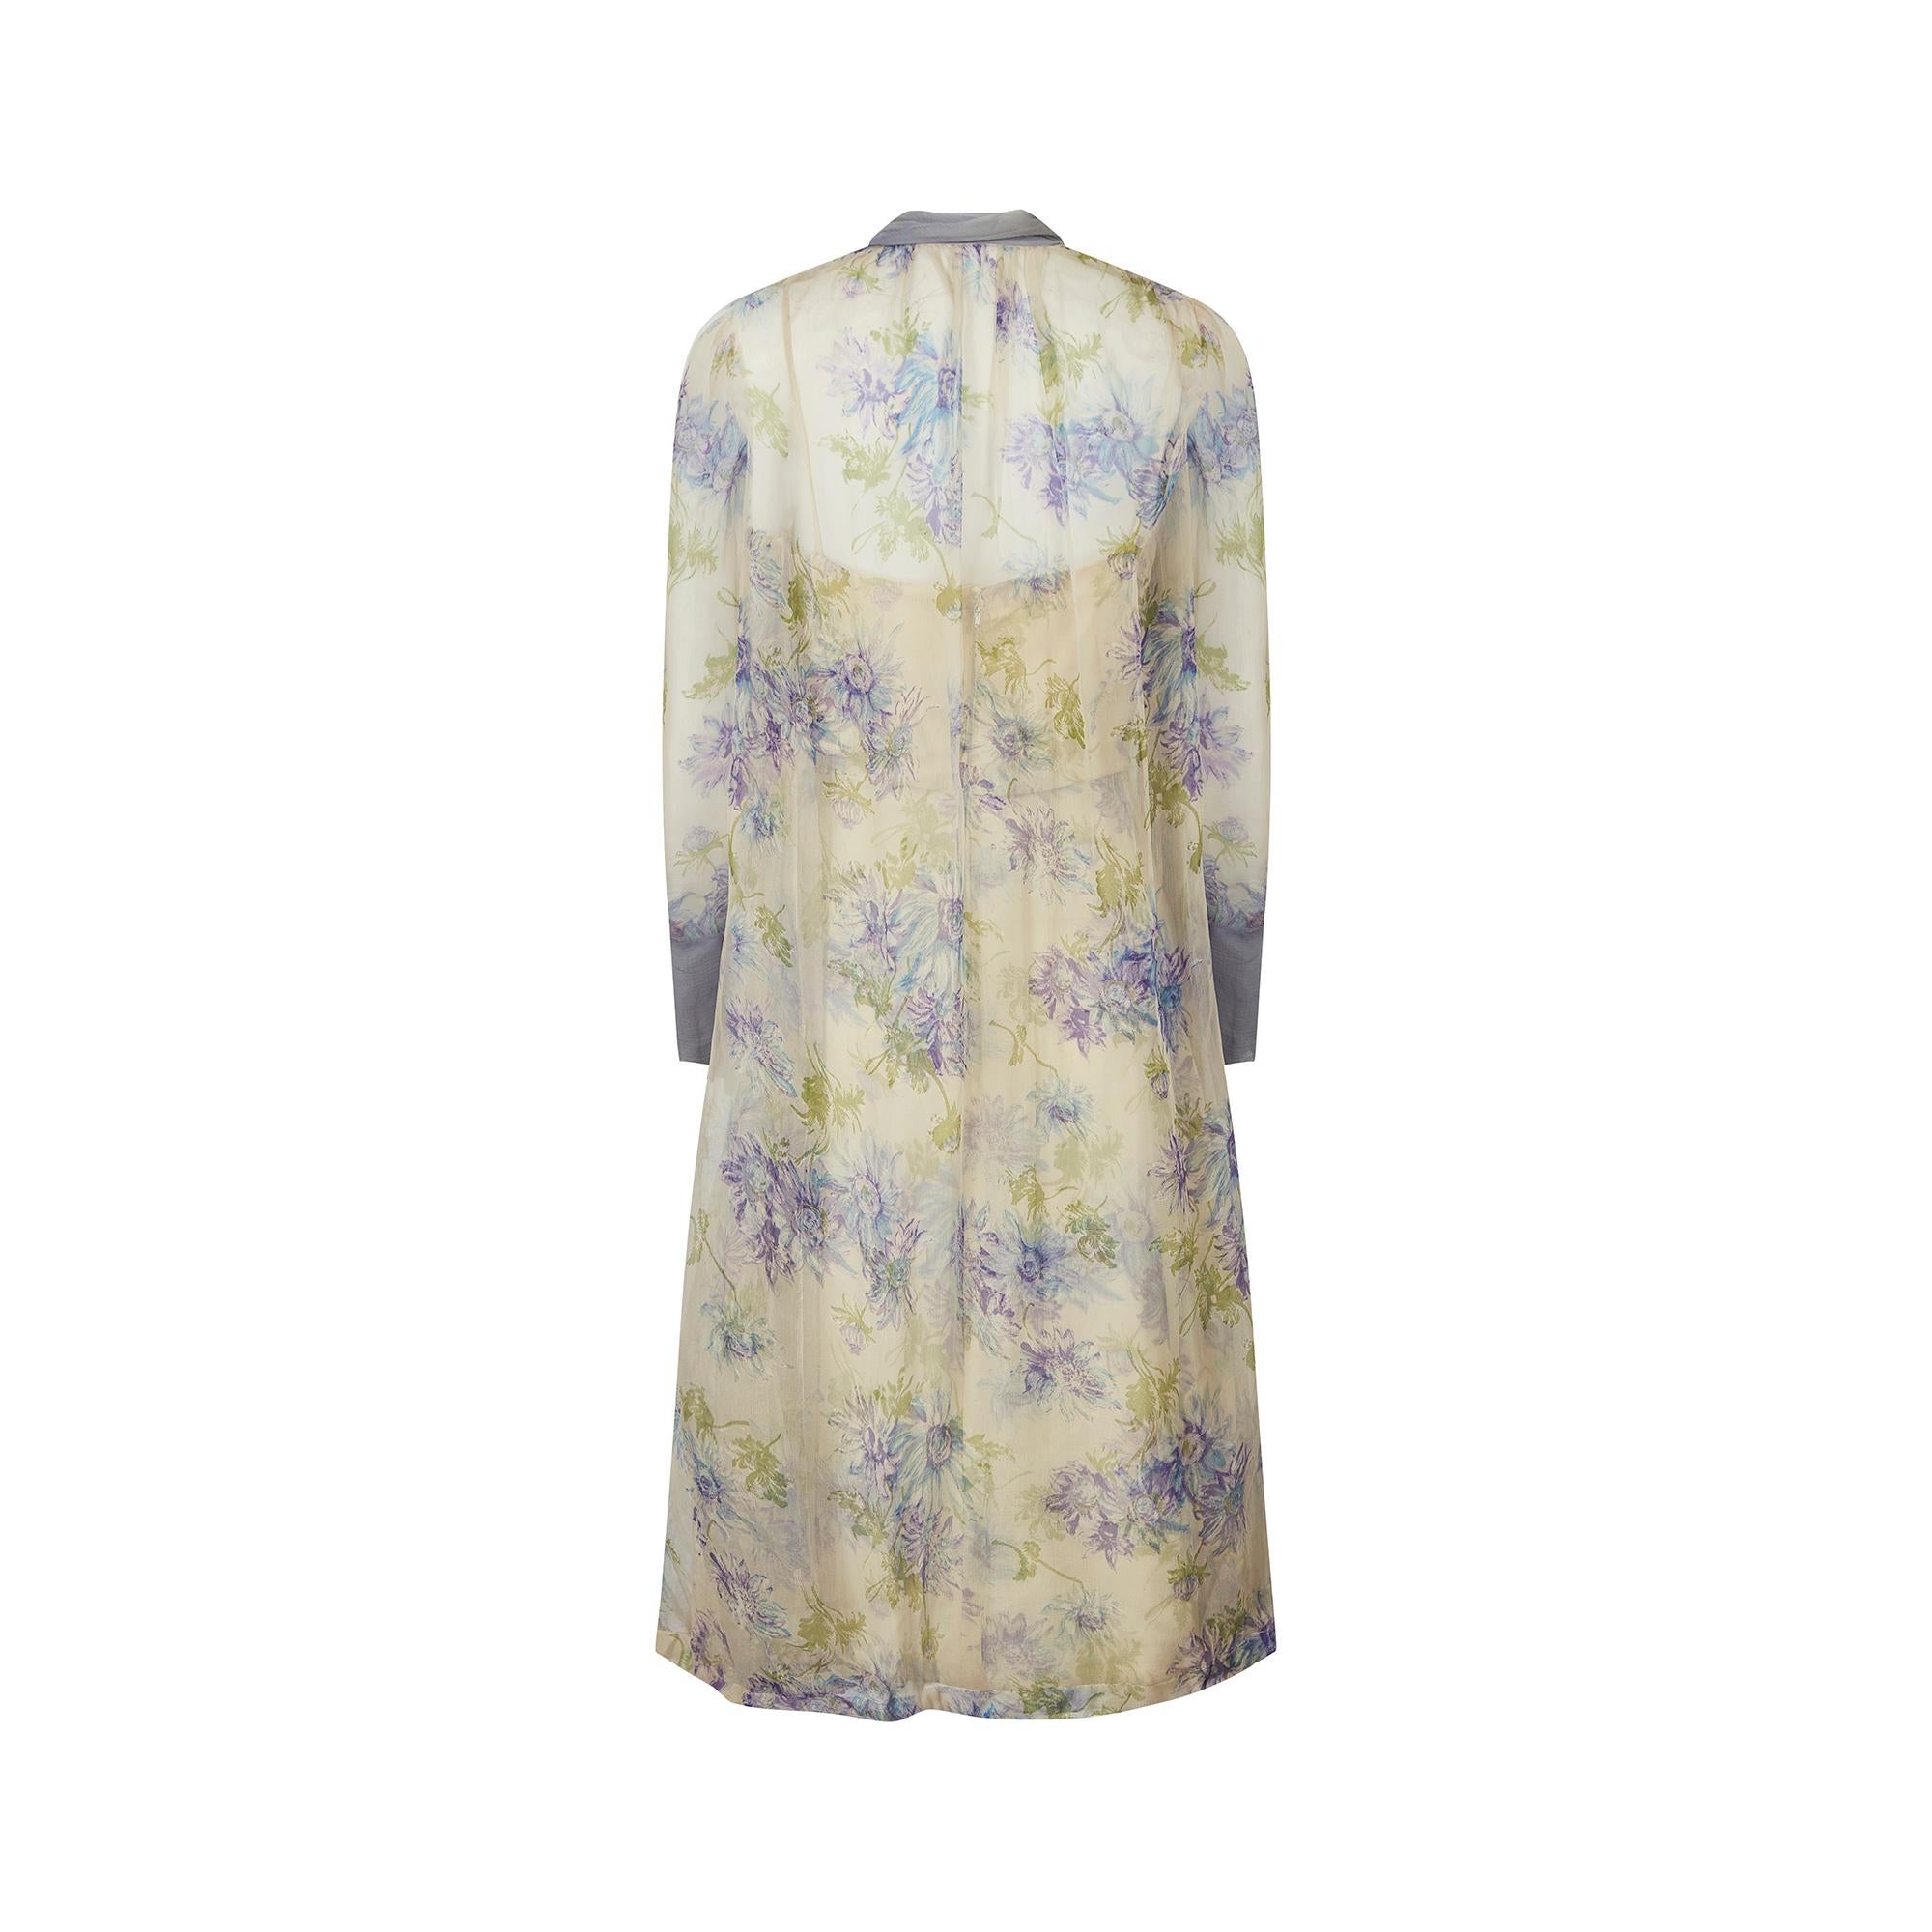 Women's 1960s Lilac and Cream Floral Silk Dress Ensemble For Sale